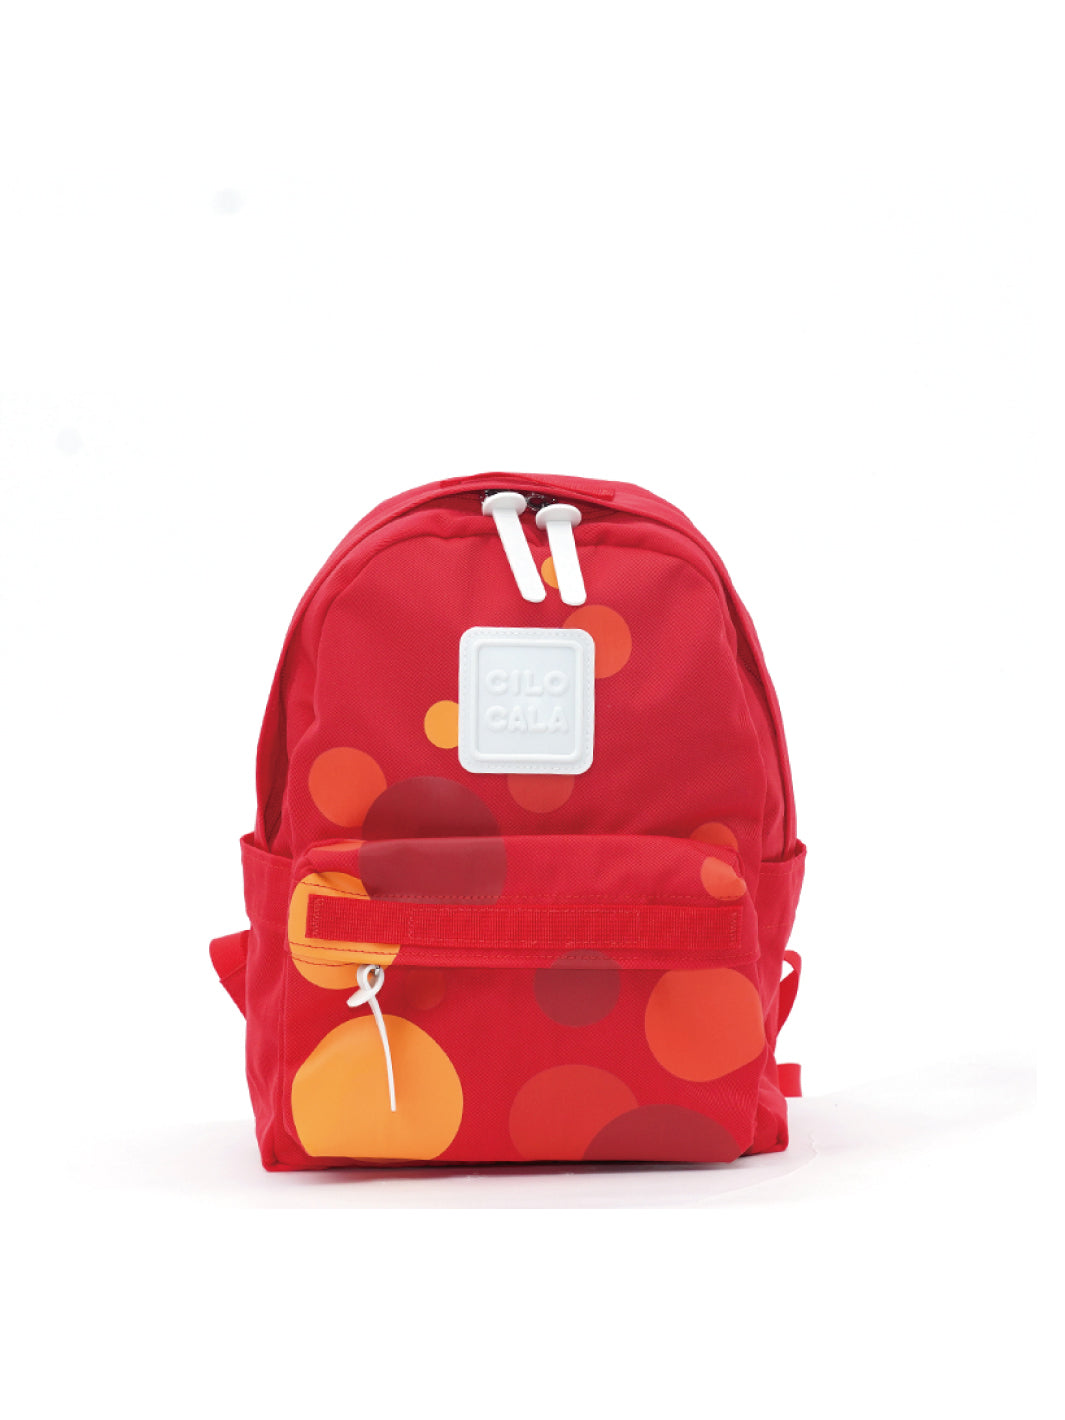 SPILLED MARBLES BACKPACK (SMALL)